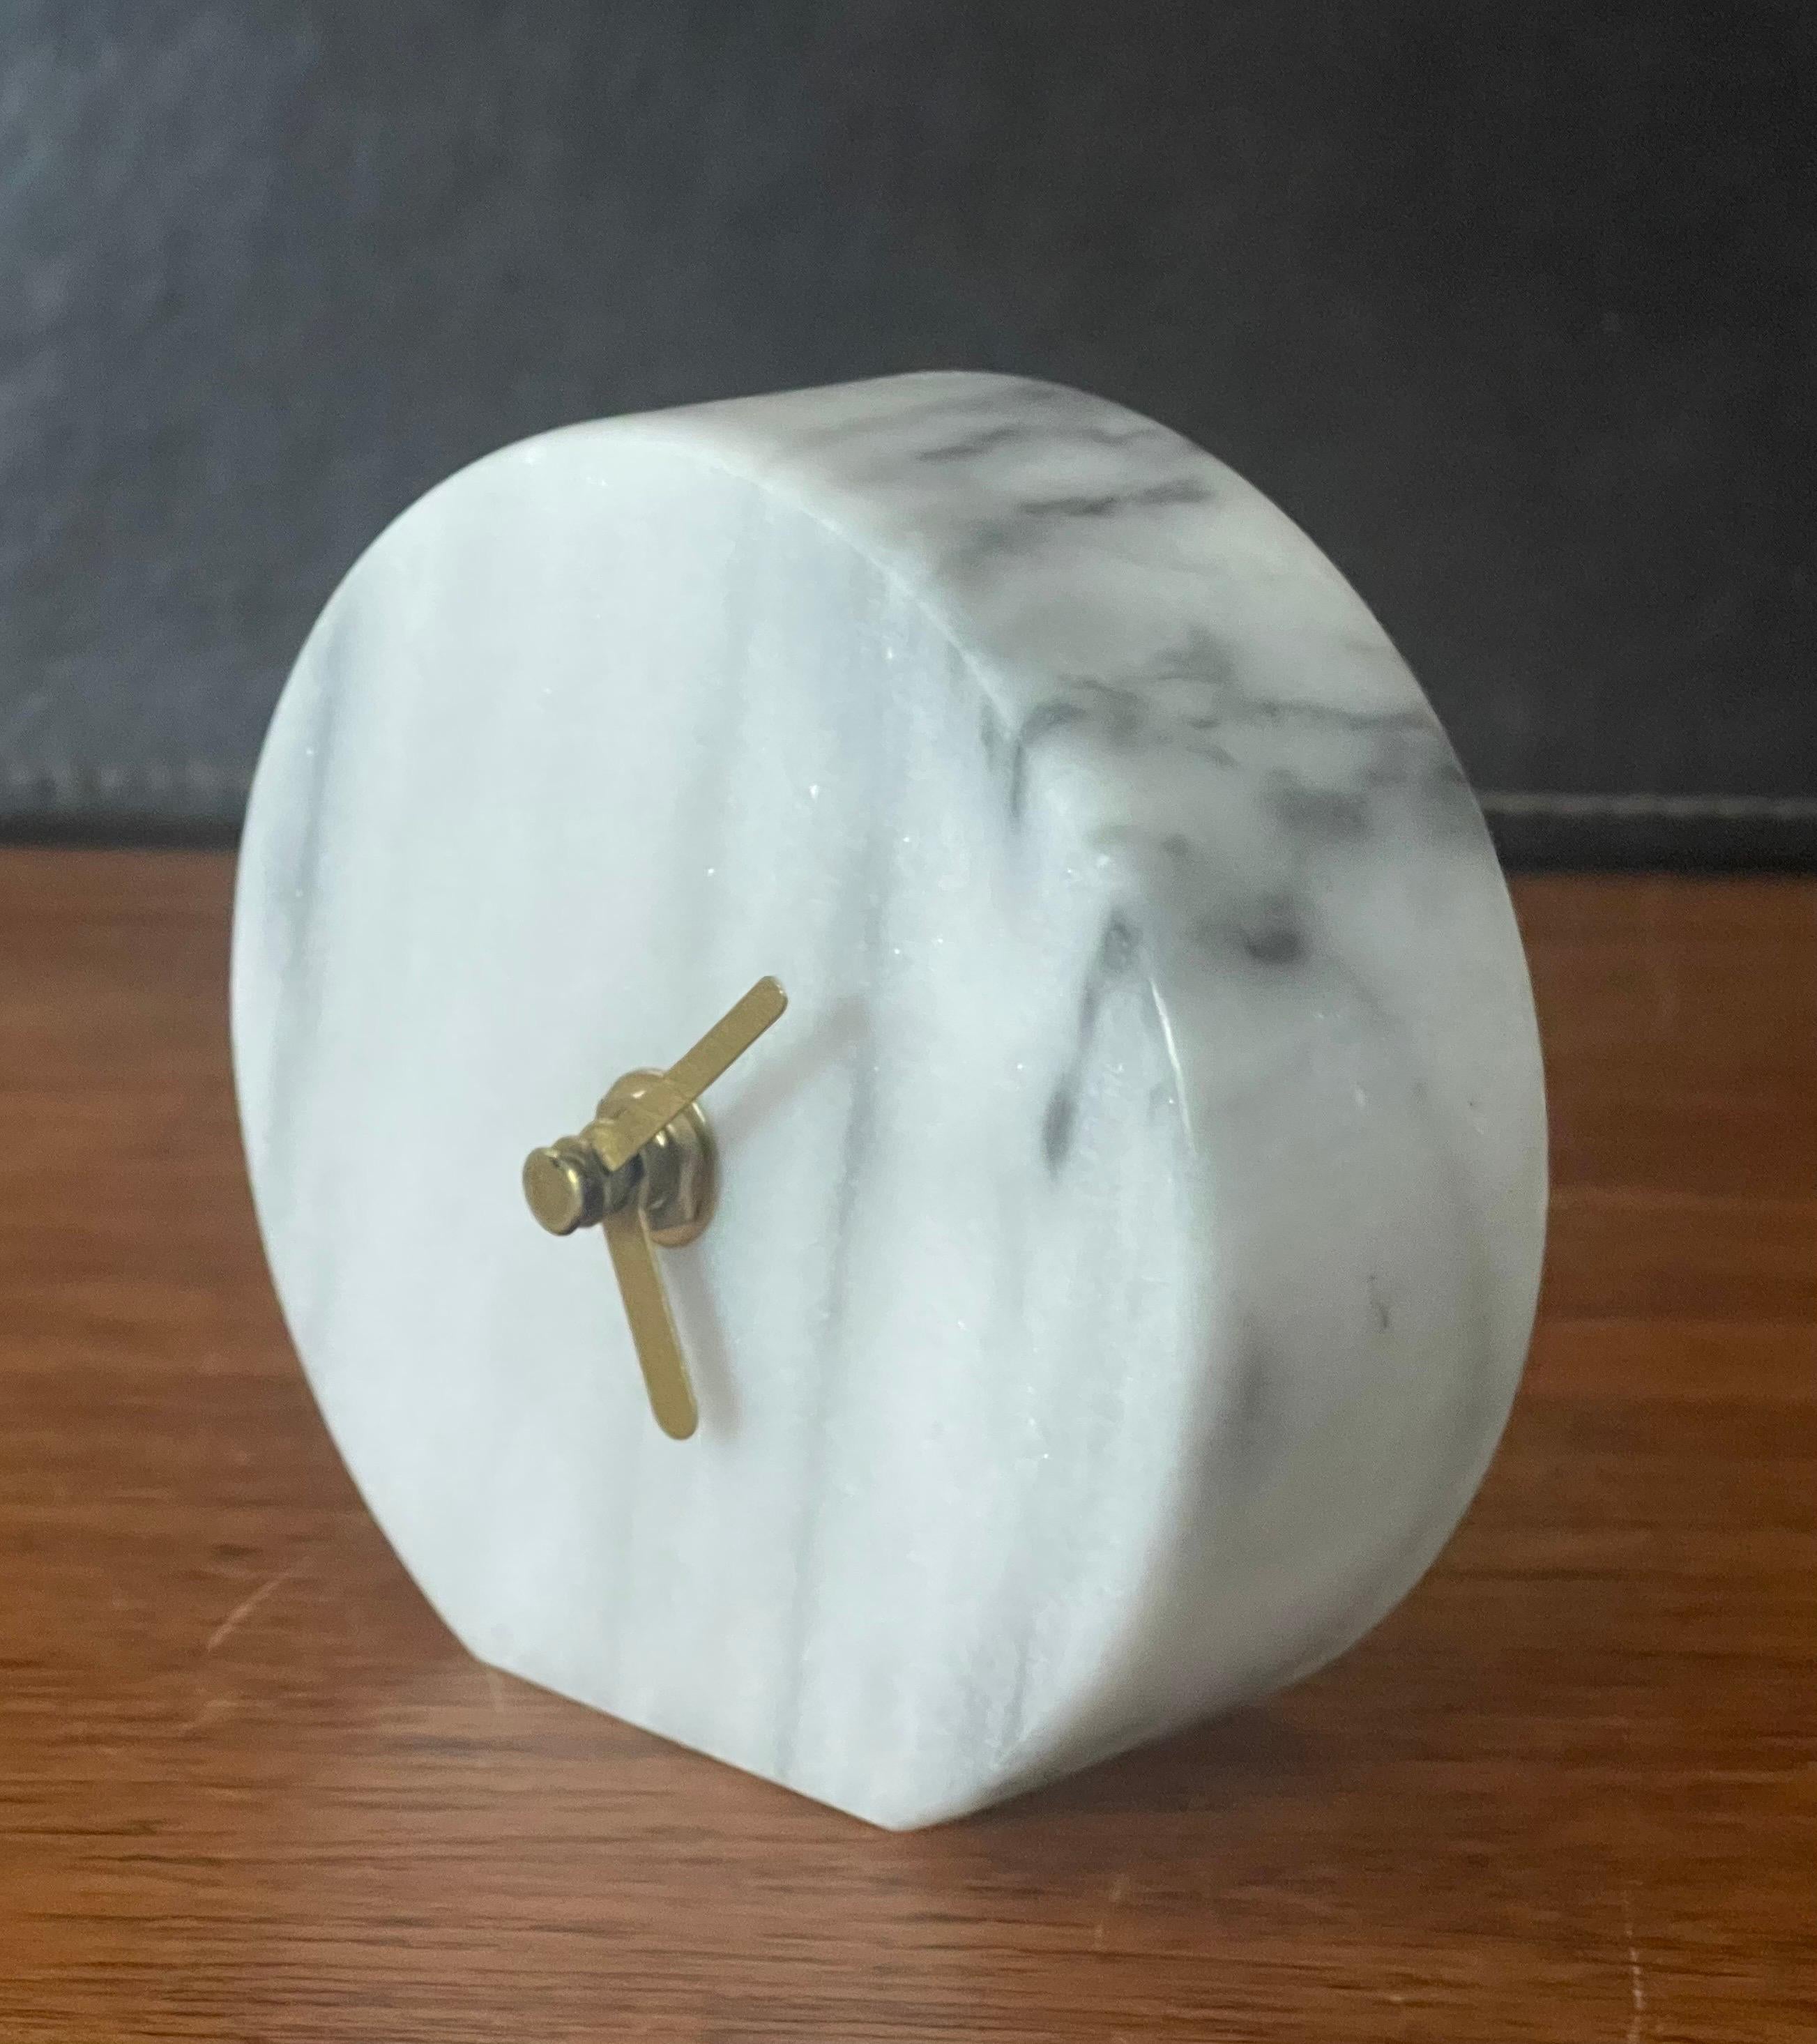 A very cool postmodern / Memphis era solid white marble desk clock with brass hands, circa 1980s. The piece has a great minimalist look and is in very good condition with no chips or cracks. It is battery-operated quartz movement and measures 4.5